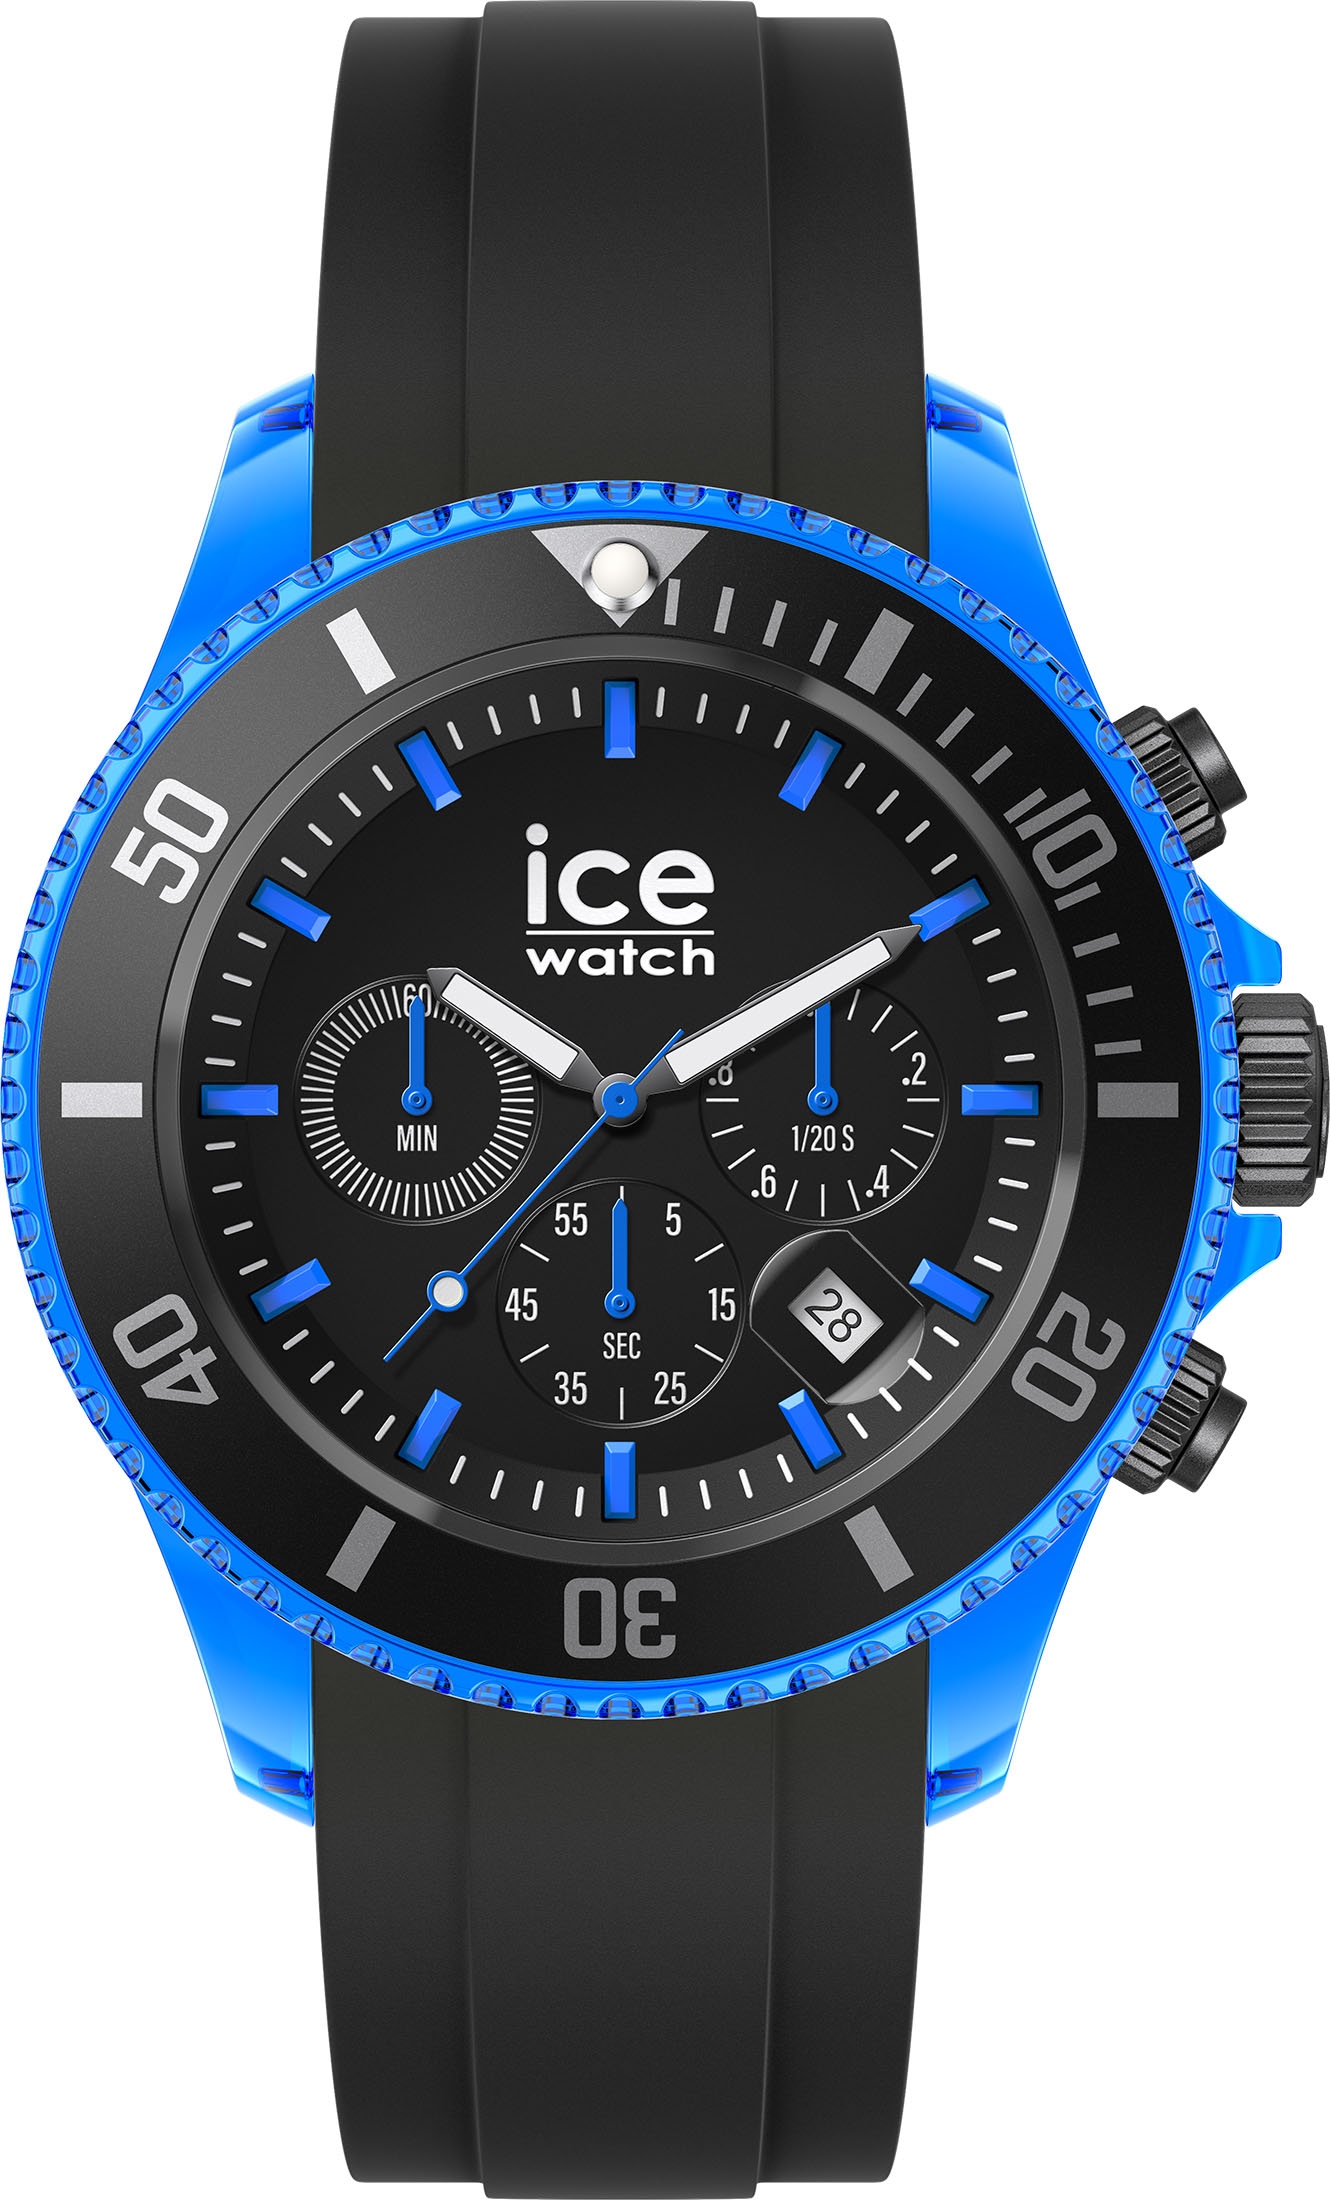 Black online bei large blue - chrono OTTO Chronograph Extra - - »ICE CH, shoppen 019844« ice-watch